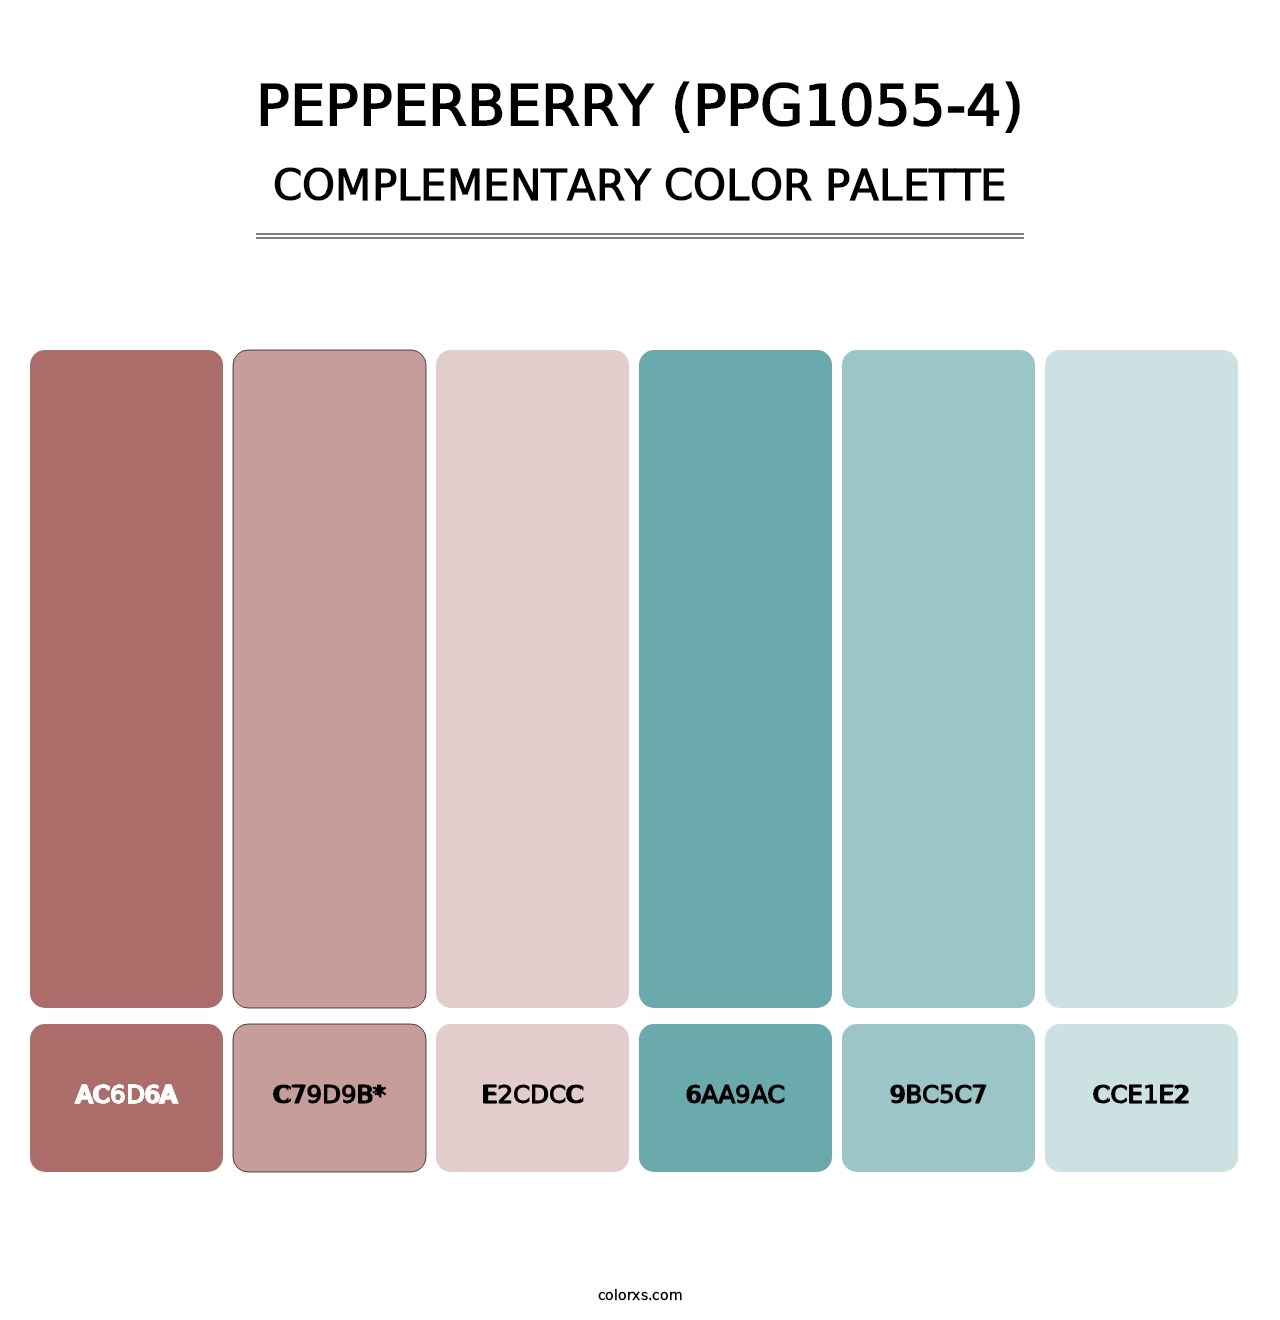 Pepperberry (PPG1055-4) - Complementary Color Palette